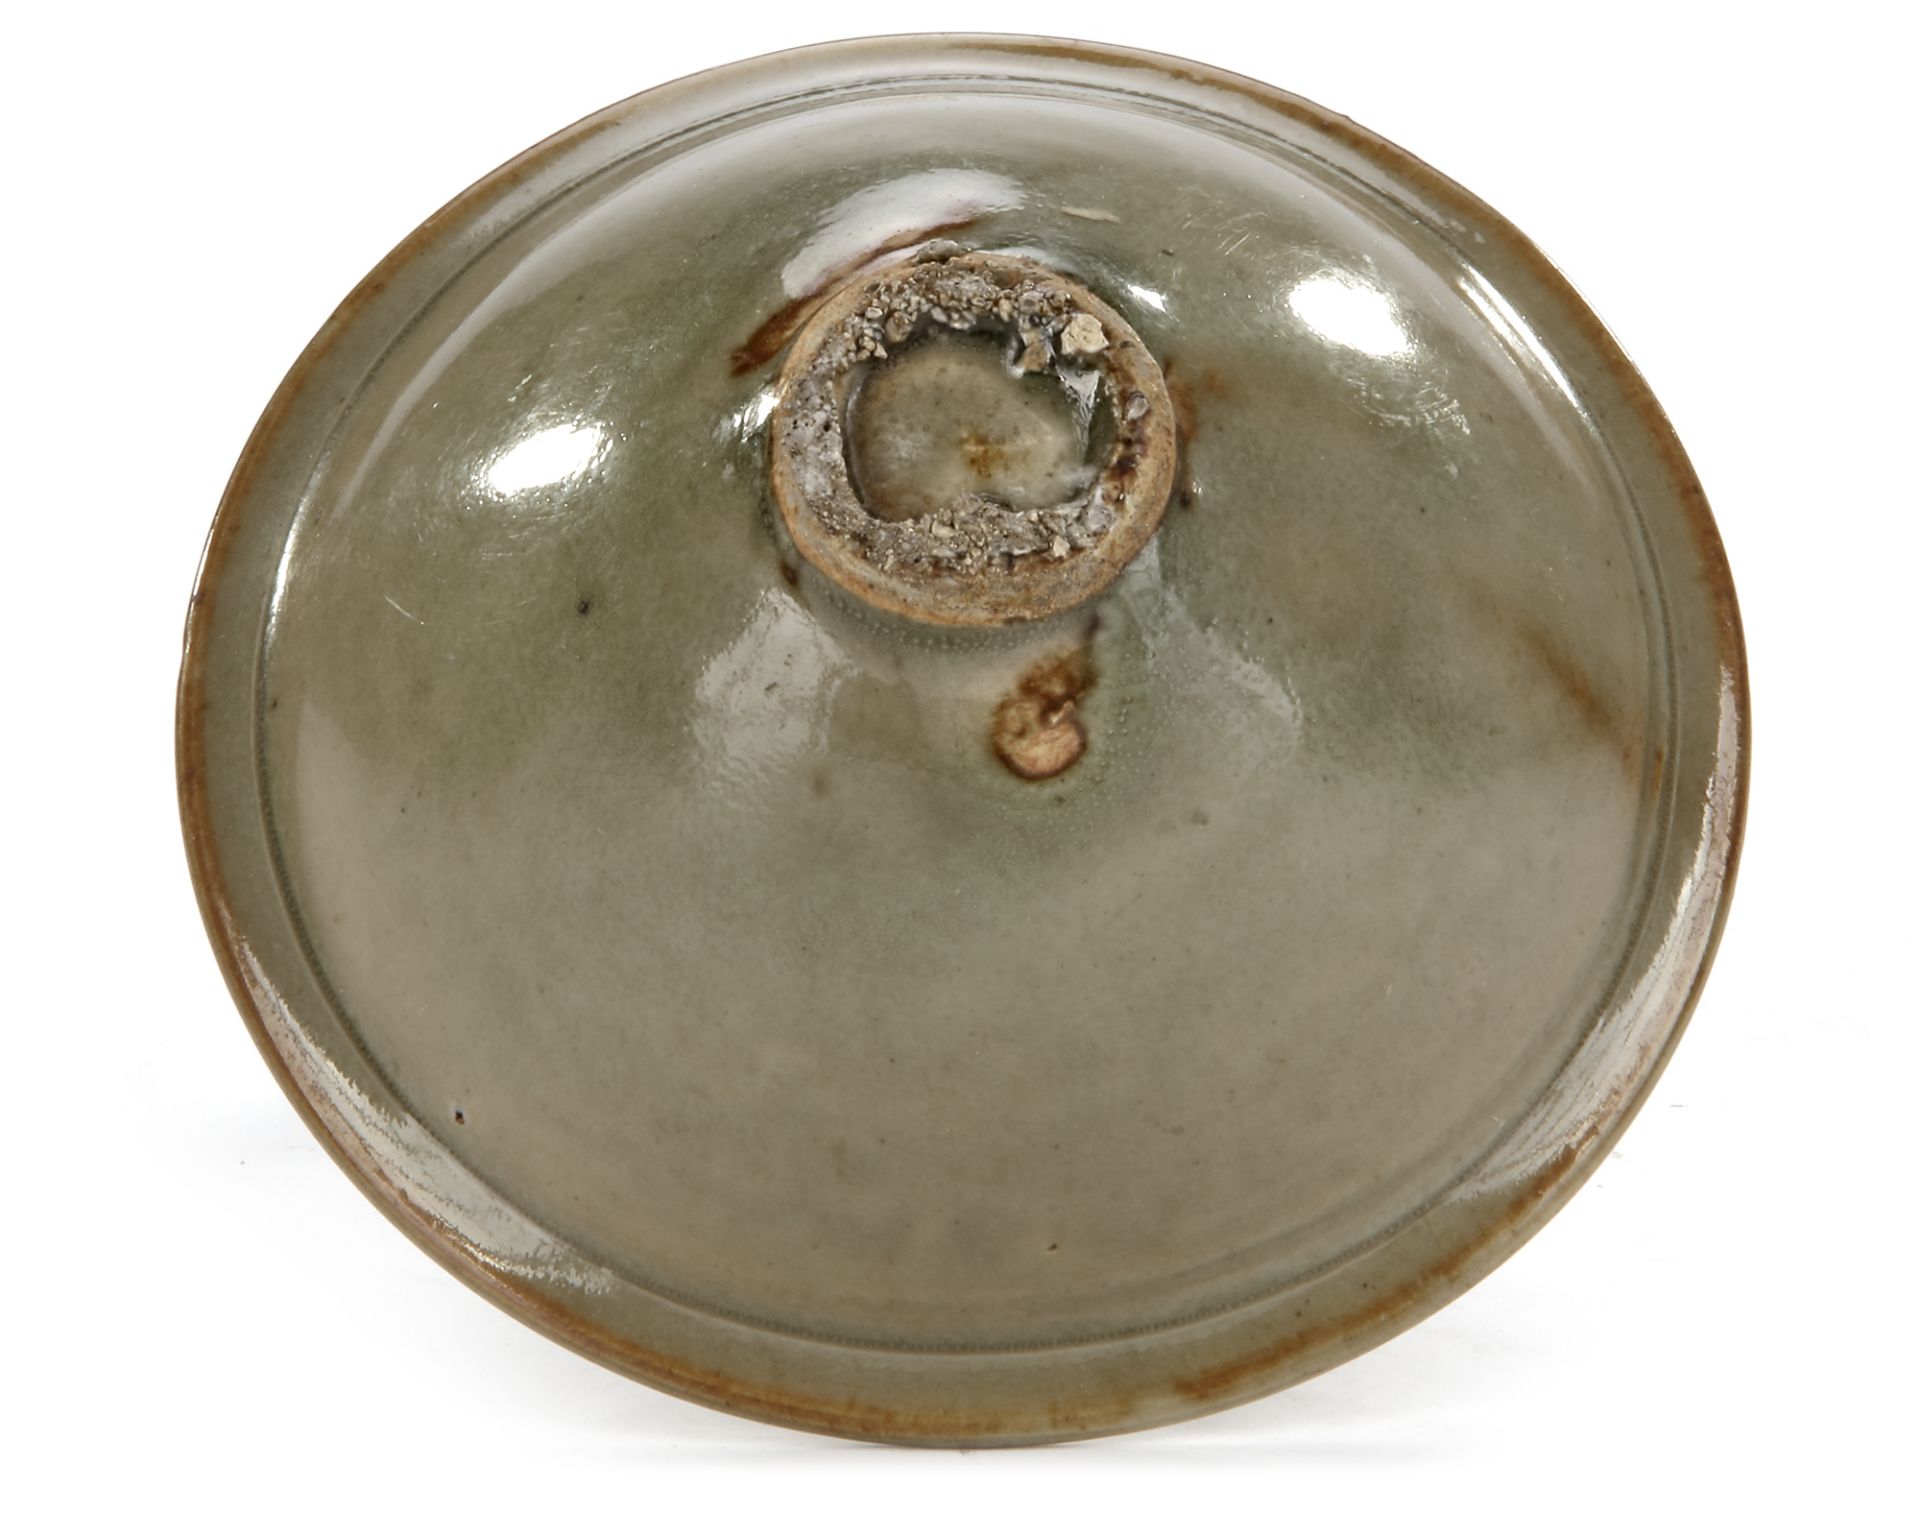 A SMALL CHINESE CELADON BOWL, SONG DYNASTY (960-1127) - Image 4 of 4